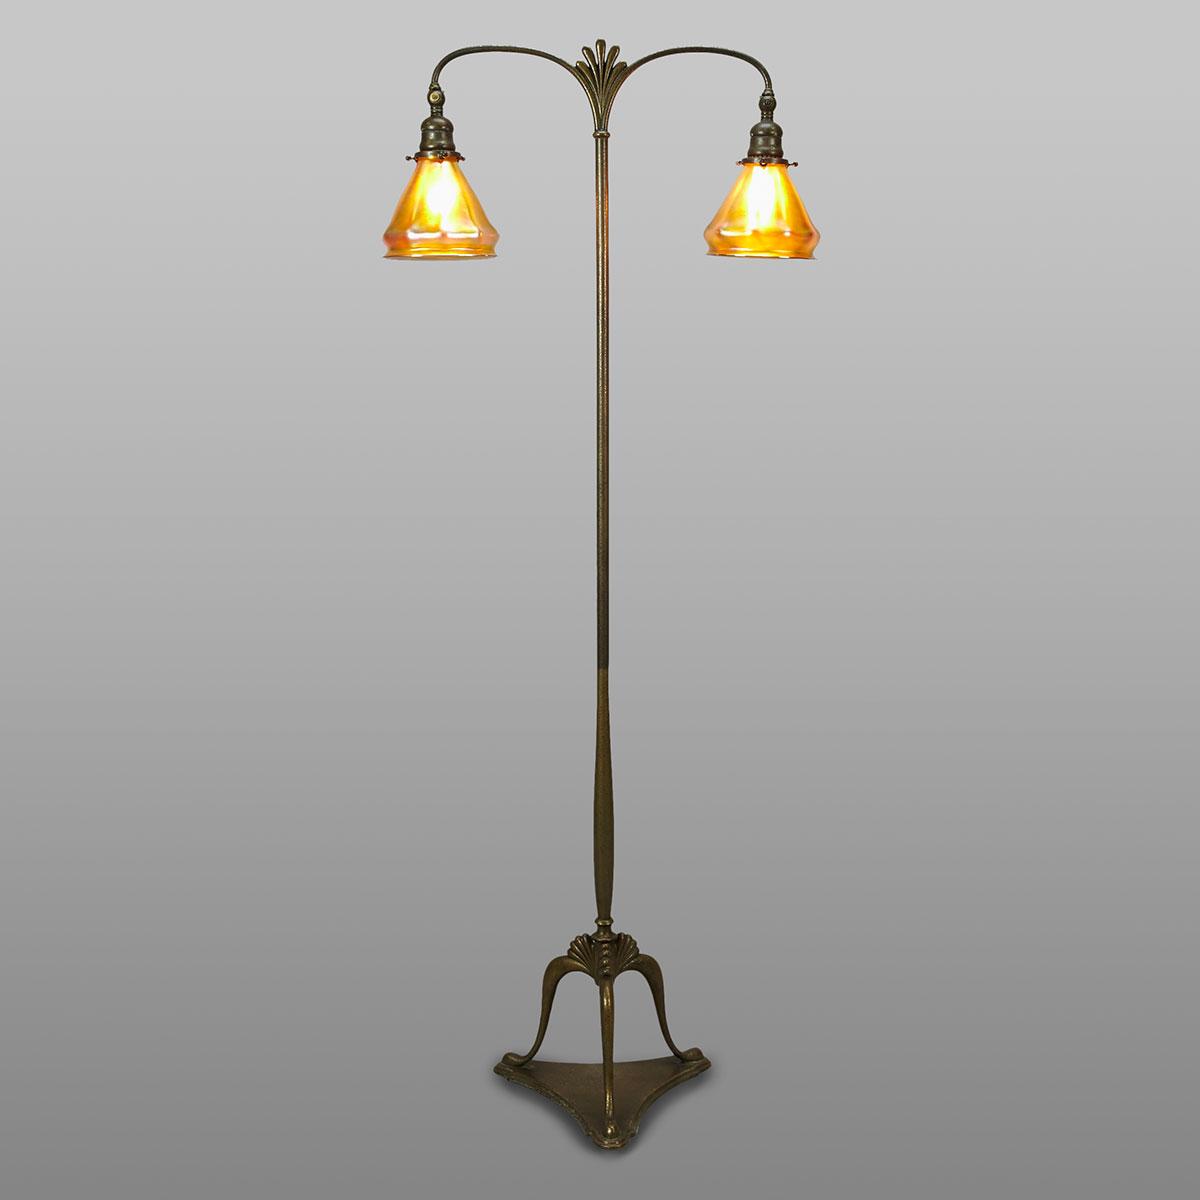 Tiffany Studios Bronze and Favrille Glass Two Light Floor Lamp, early 20th century